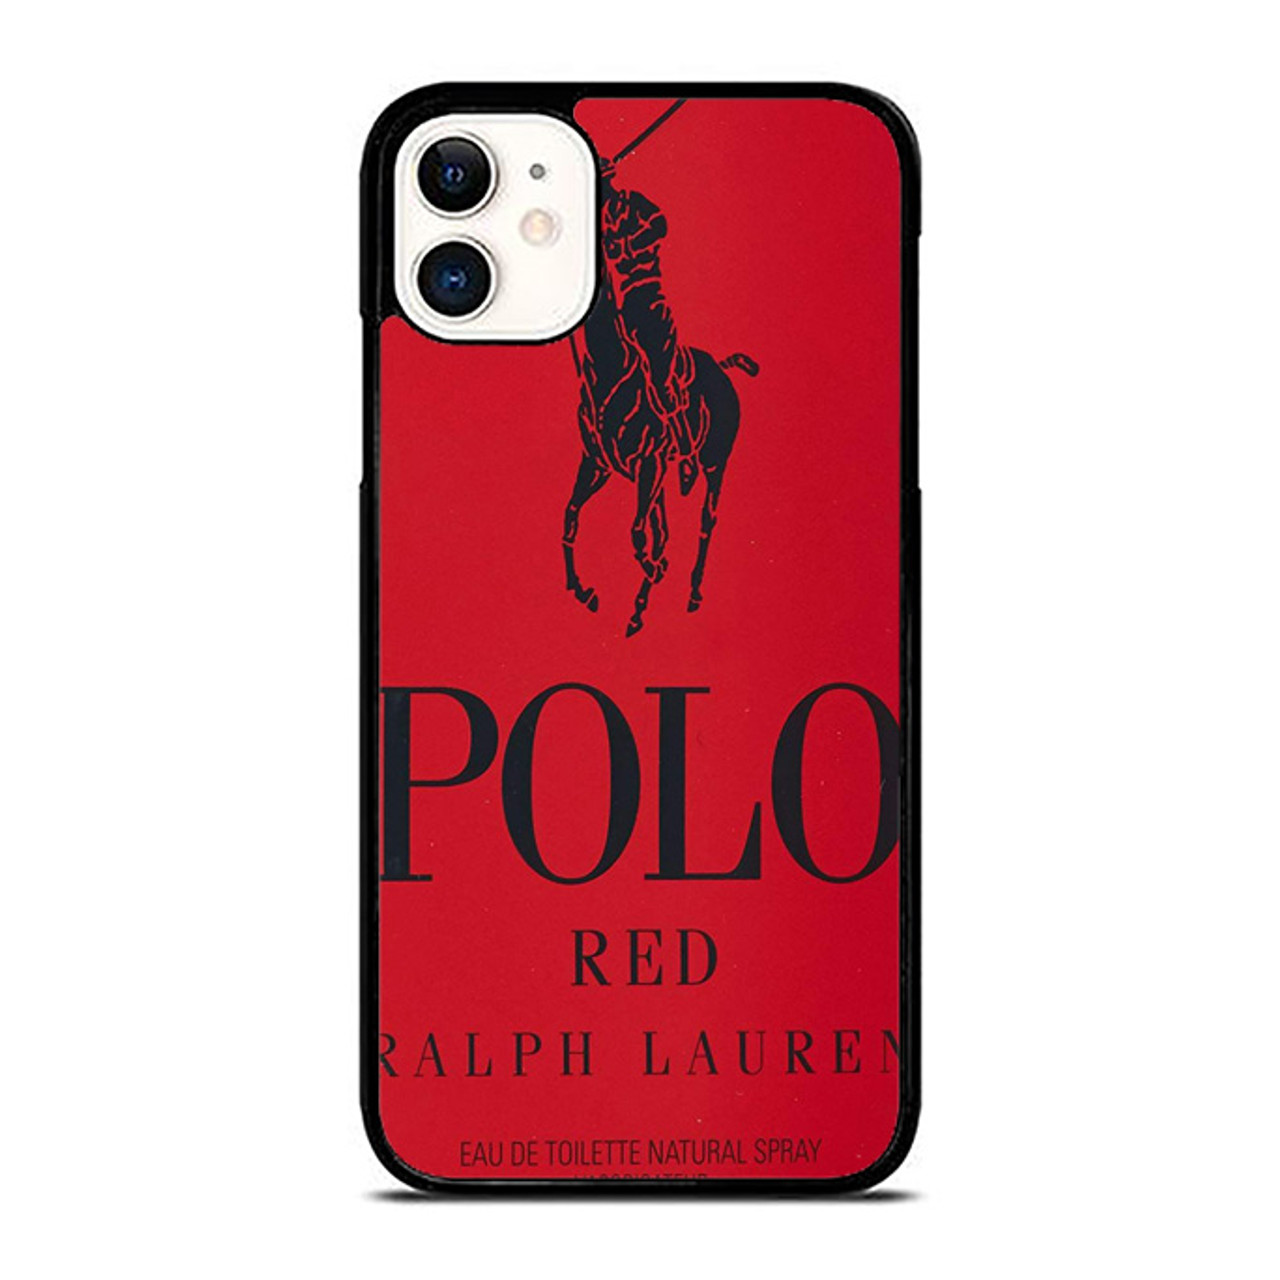 Polo Red Ralph Lauren iPhone 11 / 11 Pro / 11 Pro Max Case Cover